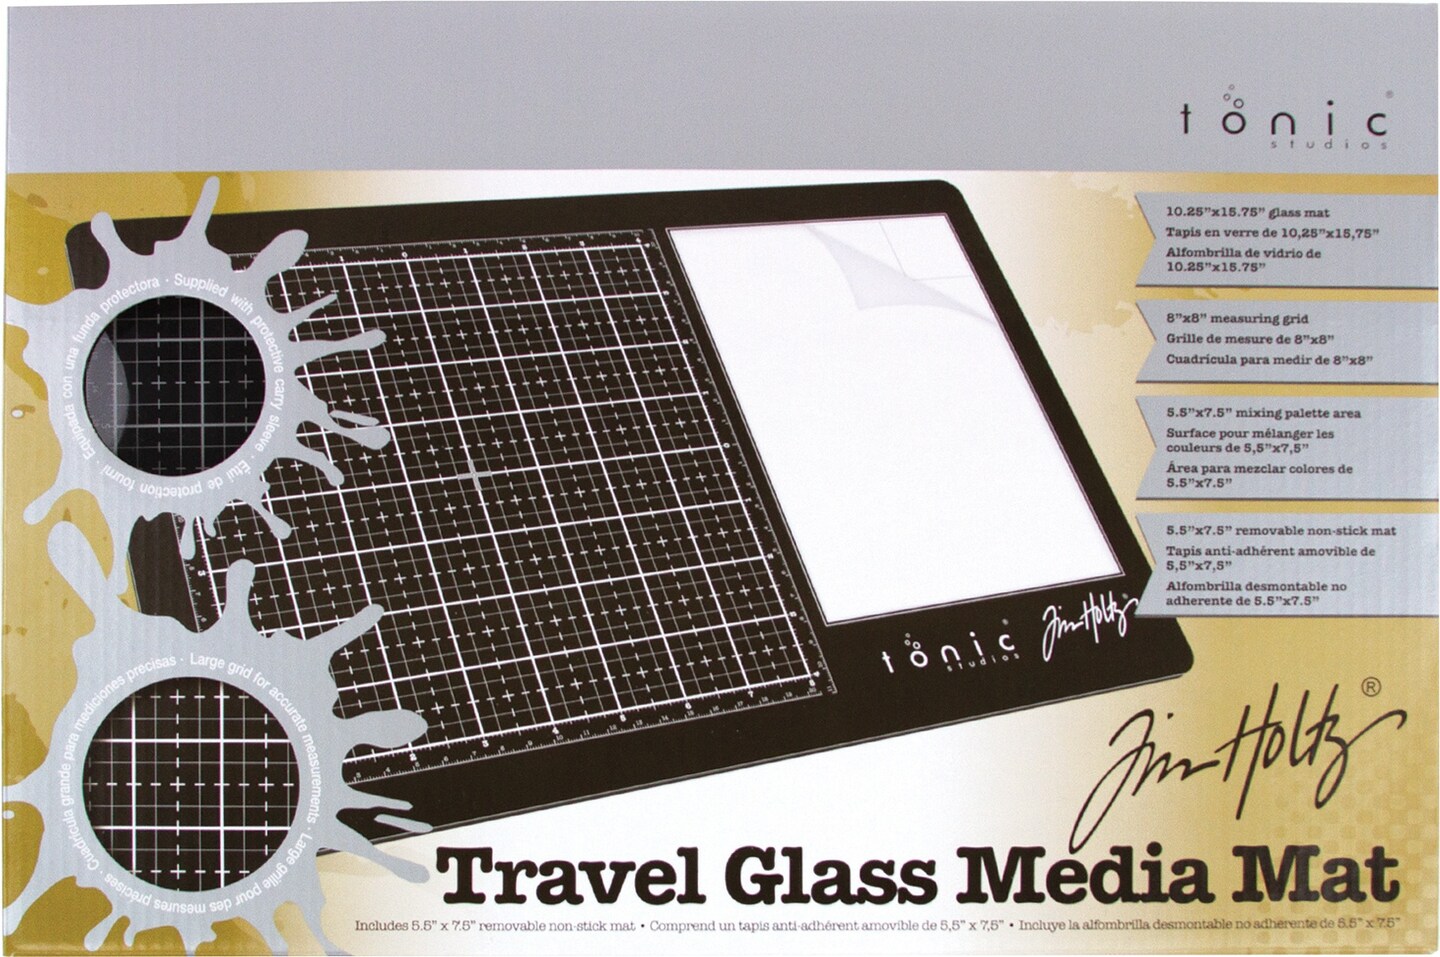 Tim Holtz Travel Glass Cutting Mat - Portable Work Surface with 8x8 Measuring Grid and Palette for Mixed Media - Art Supplies with Carry Case